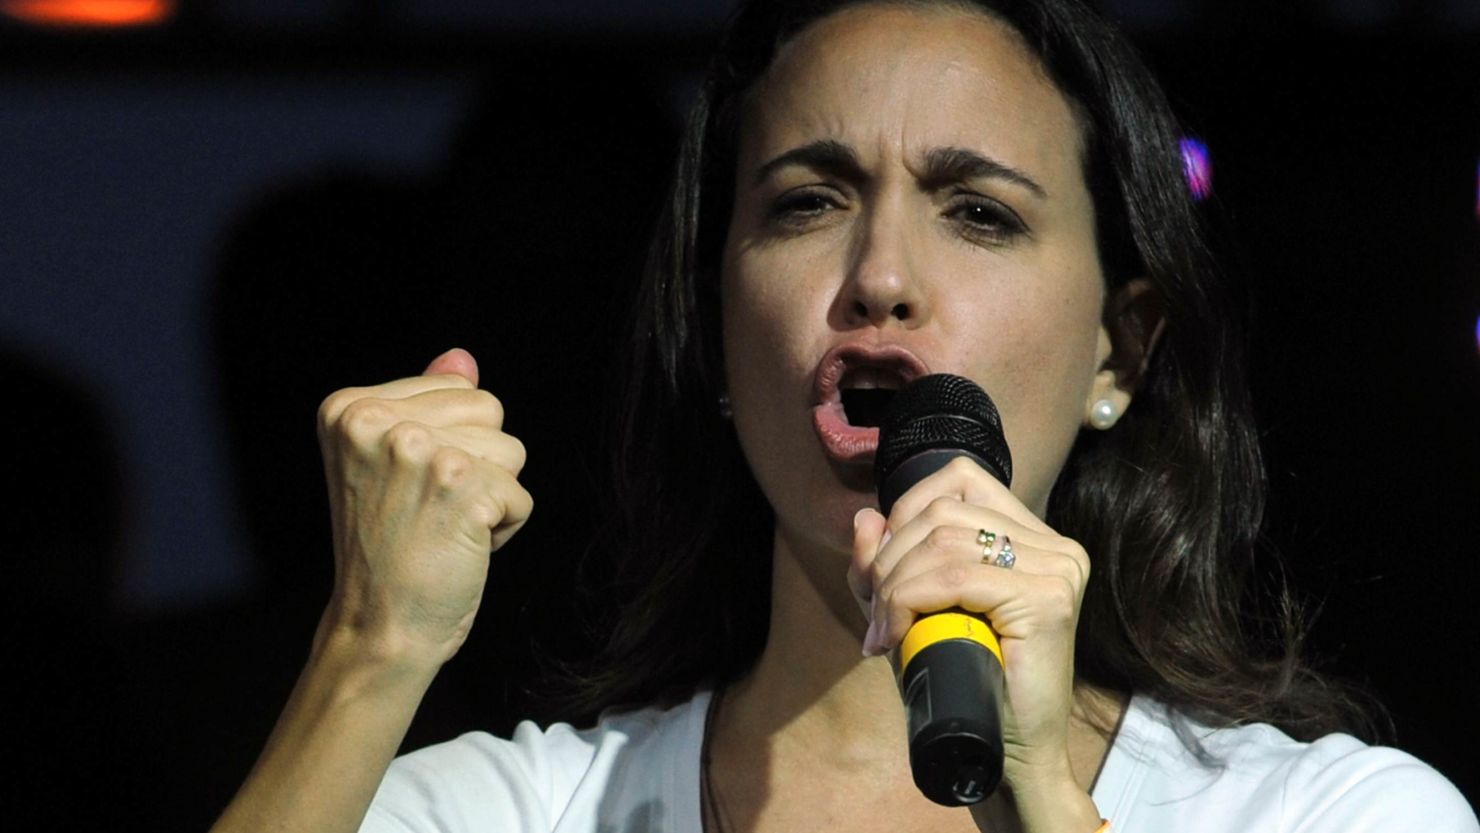 Maria Corina Machado is vying to be an opposition unity candidate in Venezuela's presidential election.